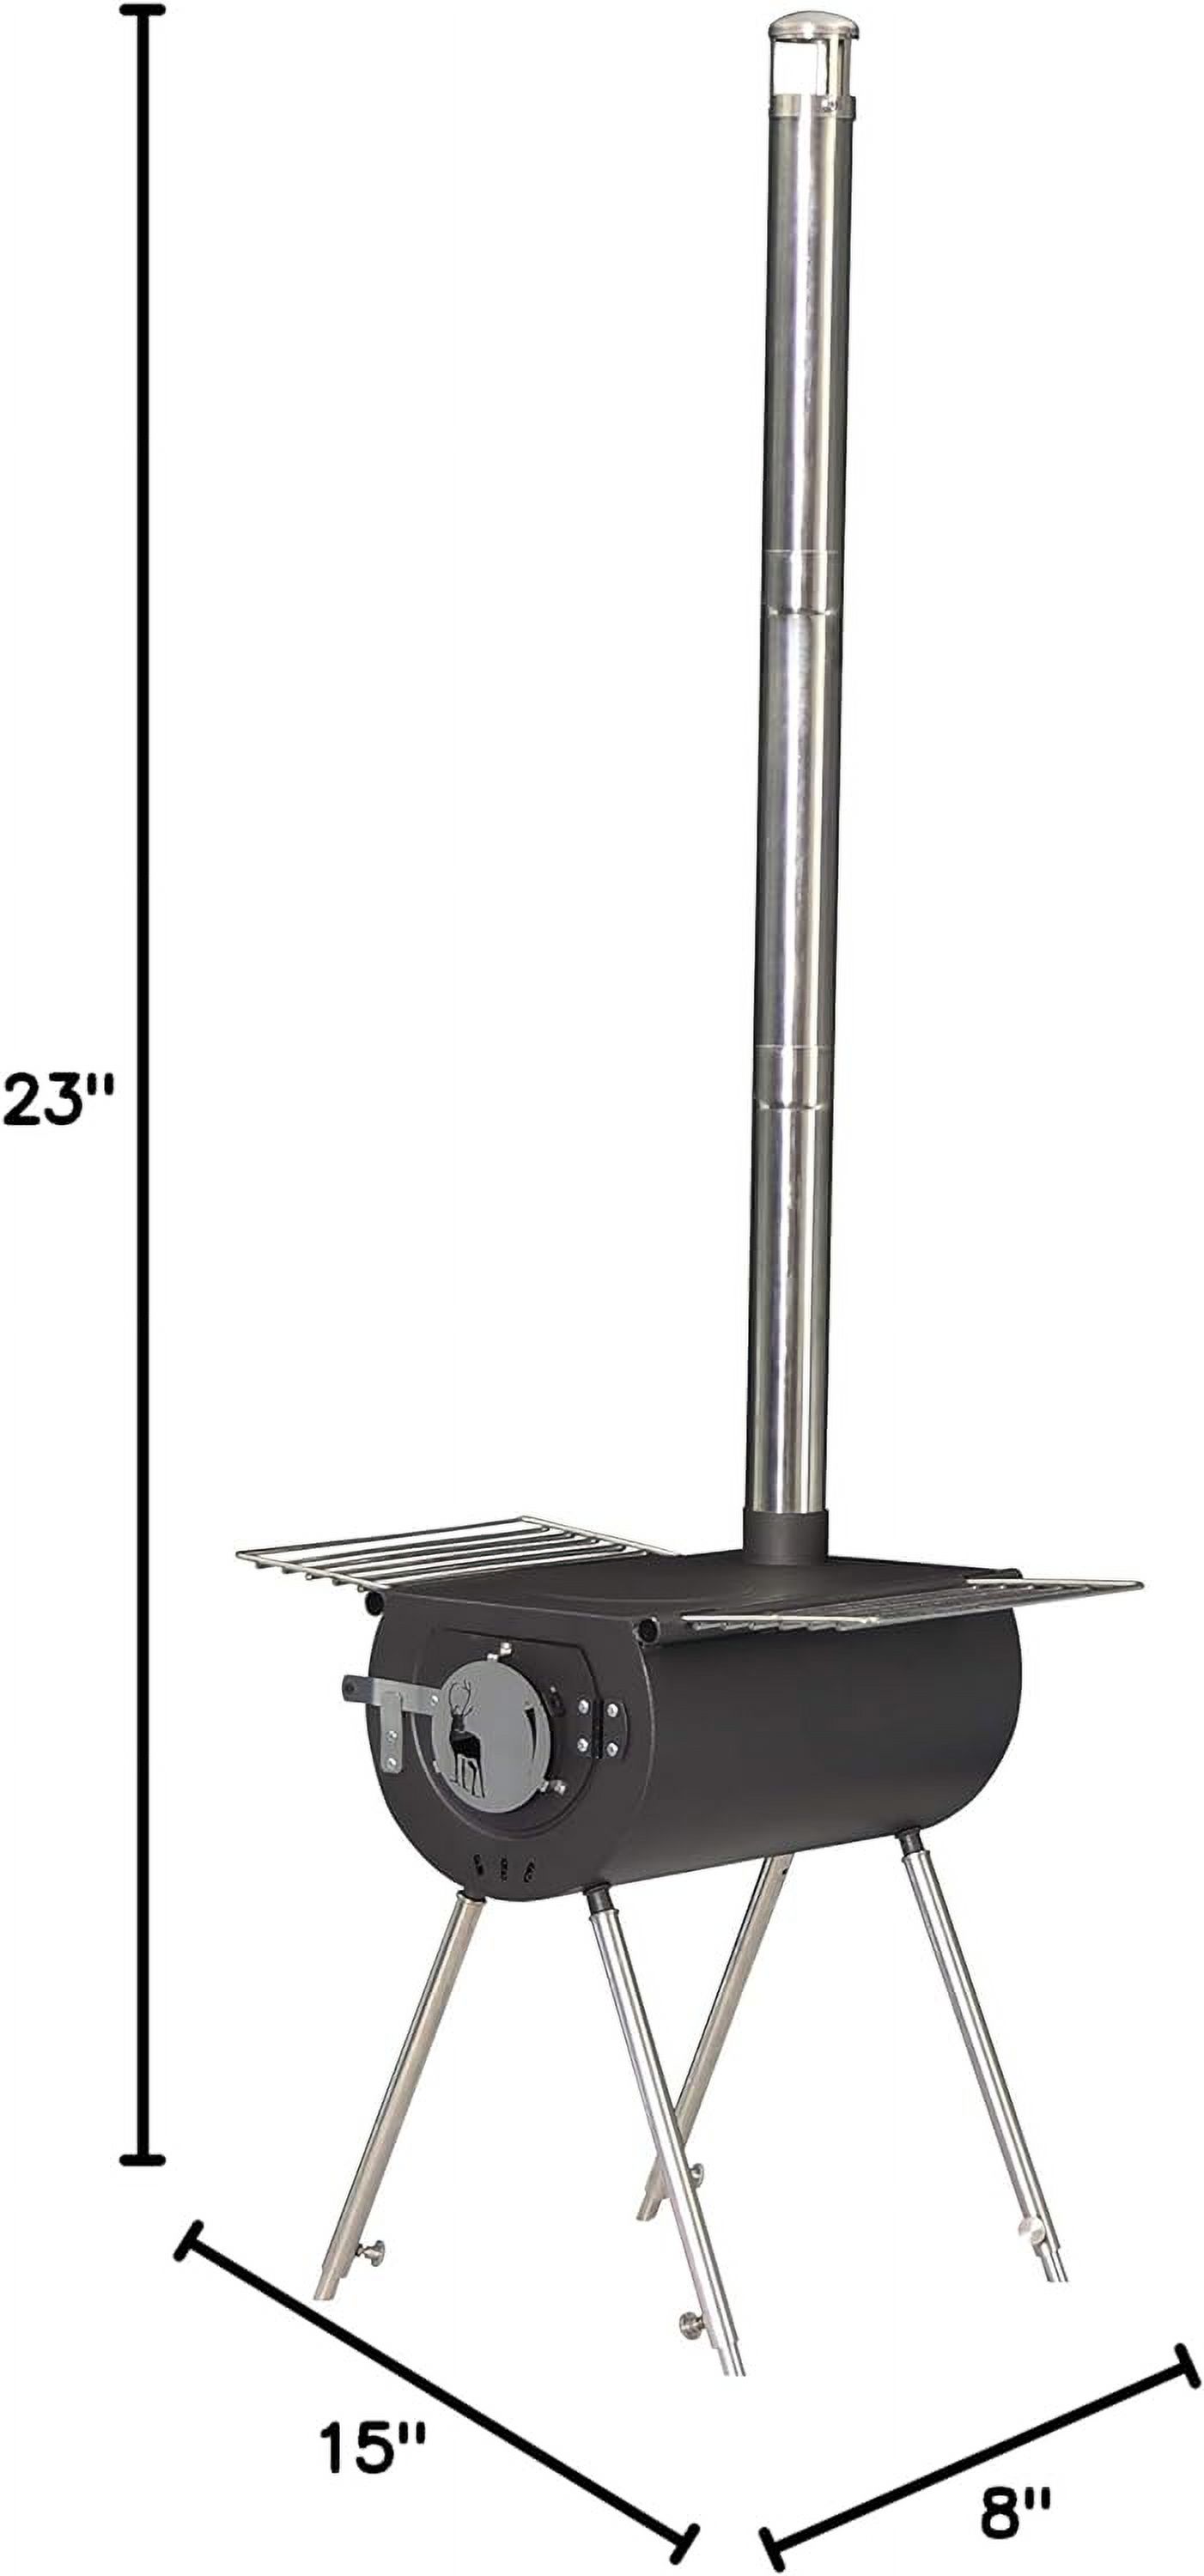 US Stove Company Caribou Backpacker 14 Inch Camp Stove with Extendable Legs - image 3 of 11